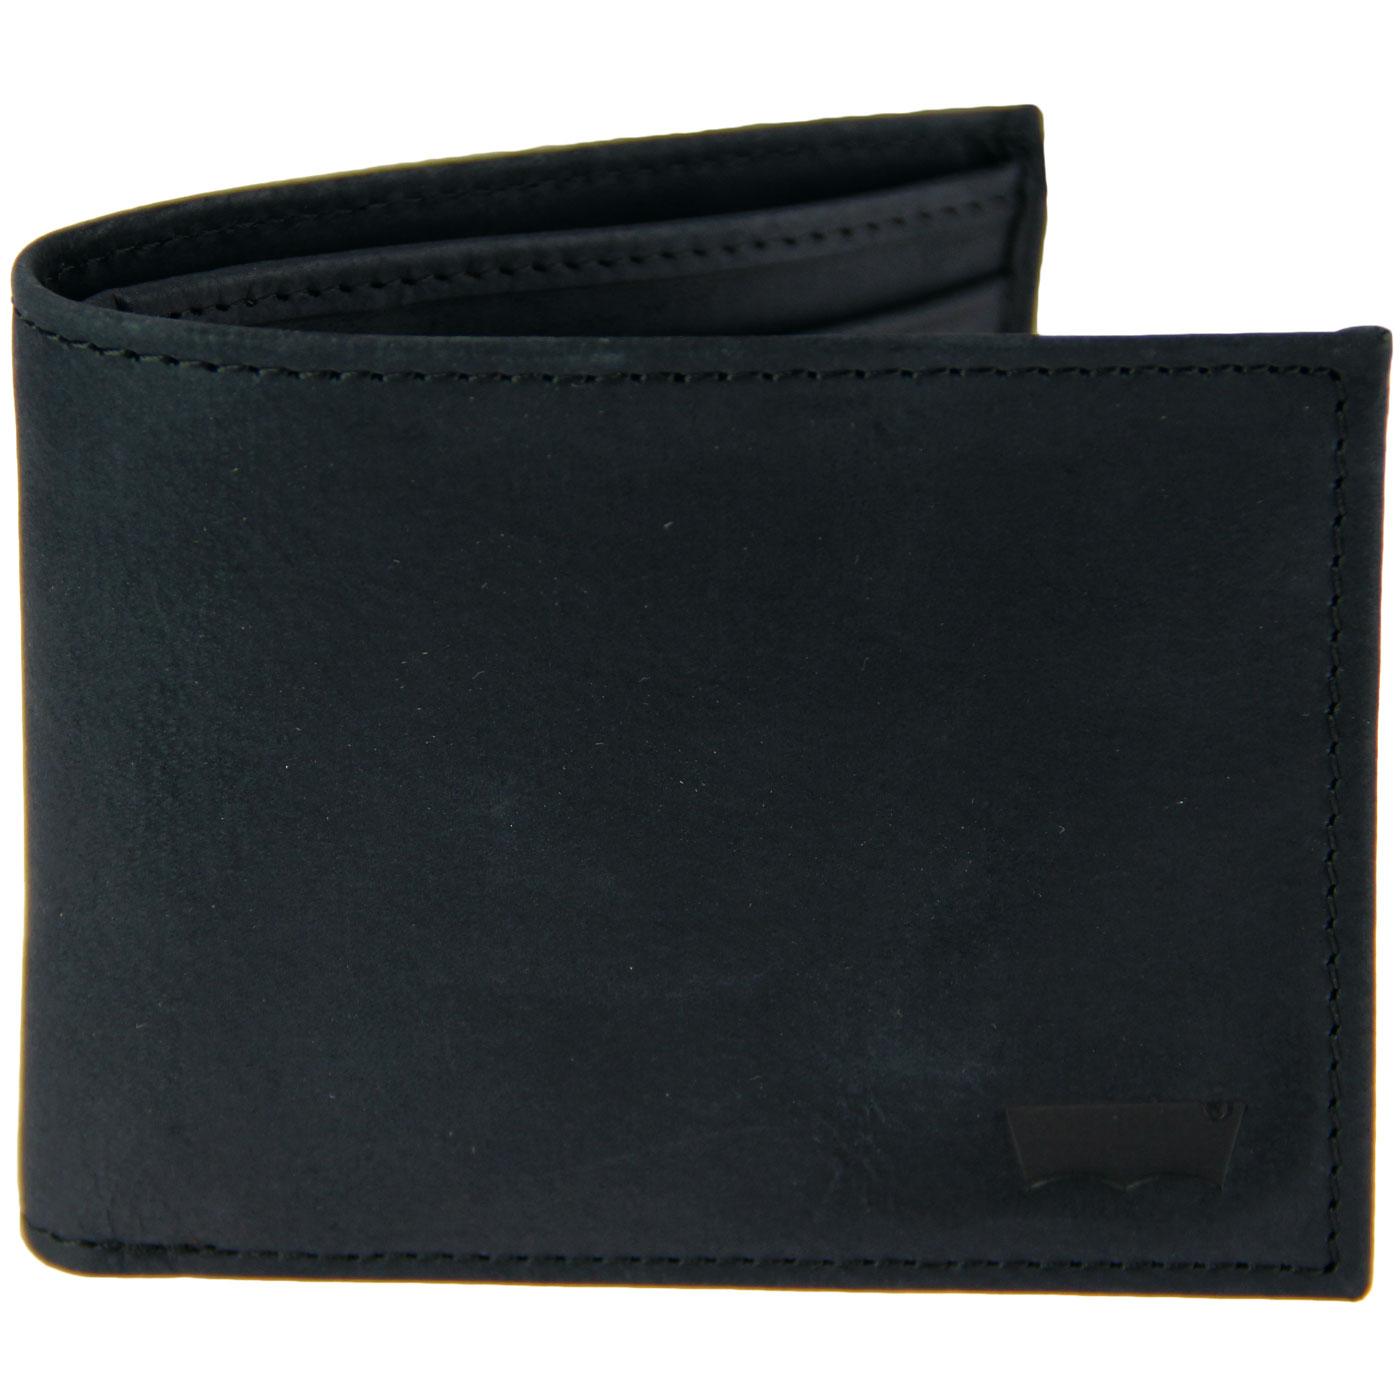 LEVI'S Retro Sueded Leather Batwing Bifold Wallet in Black